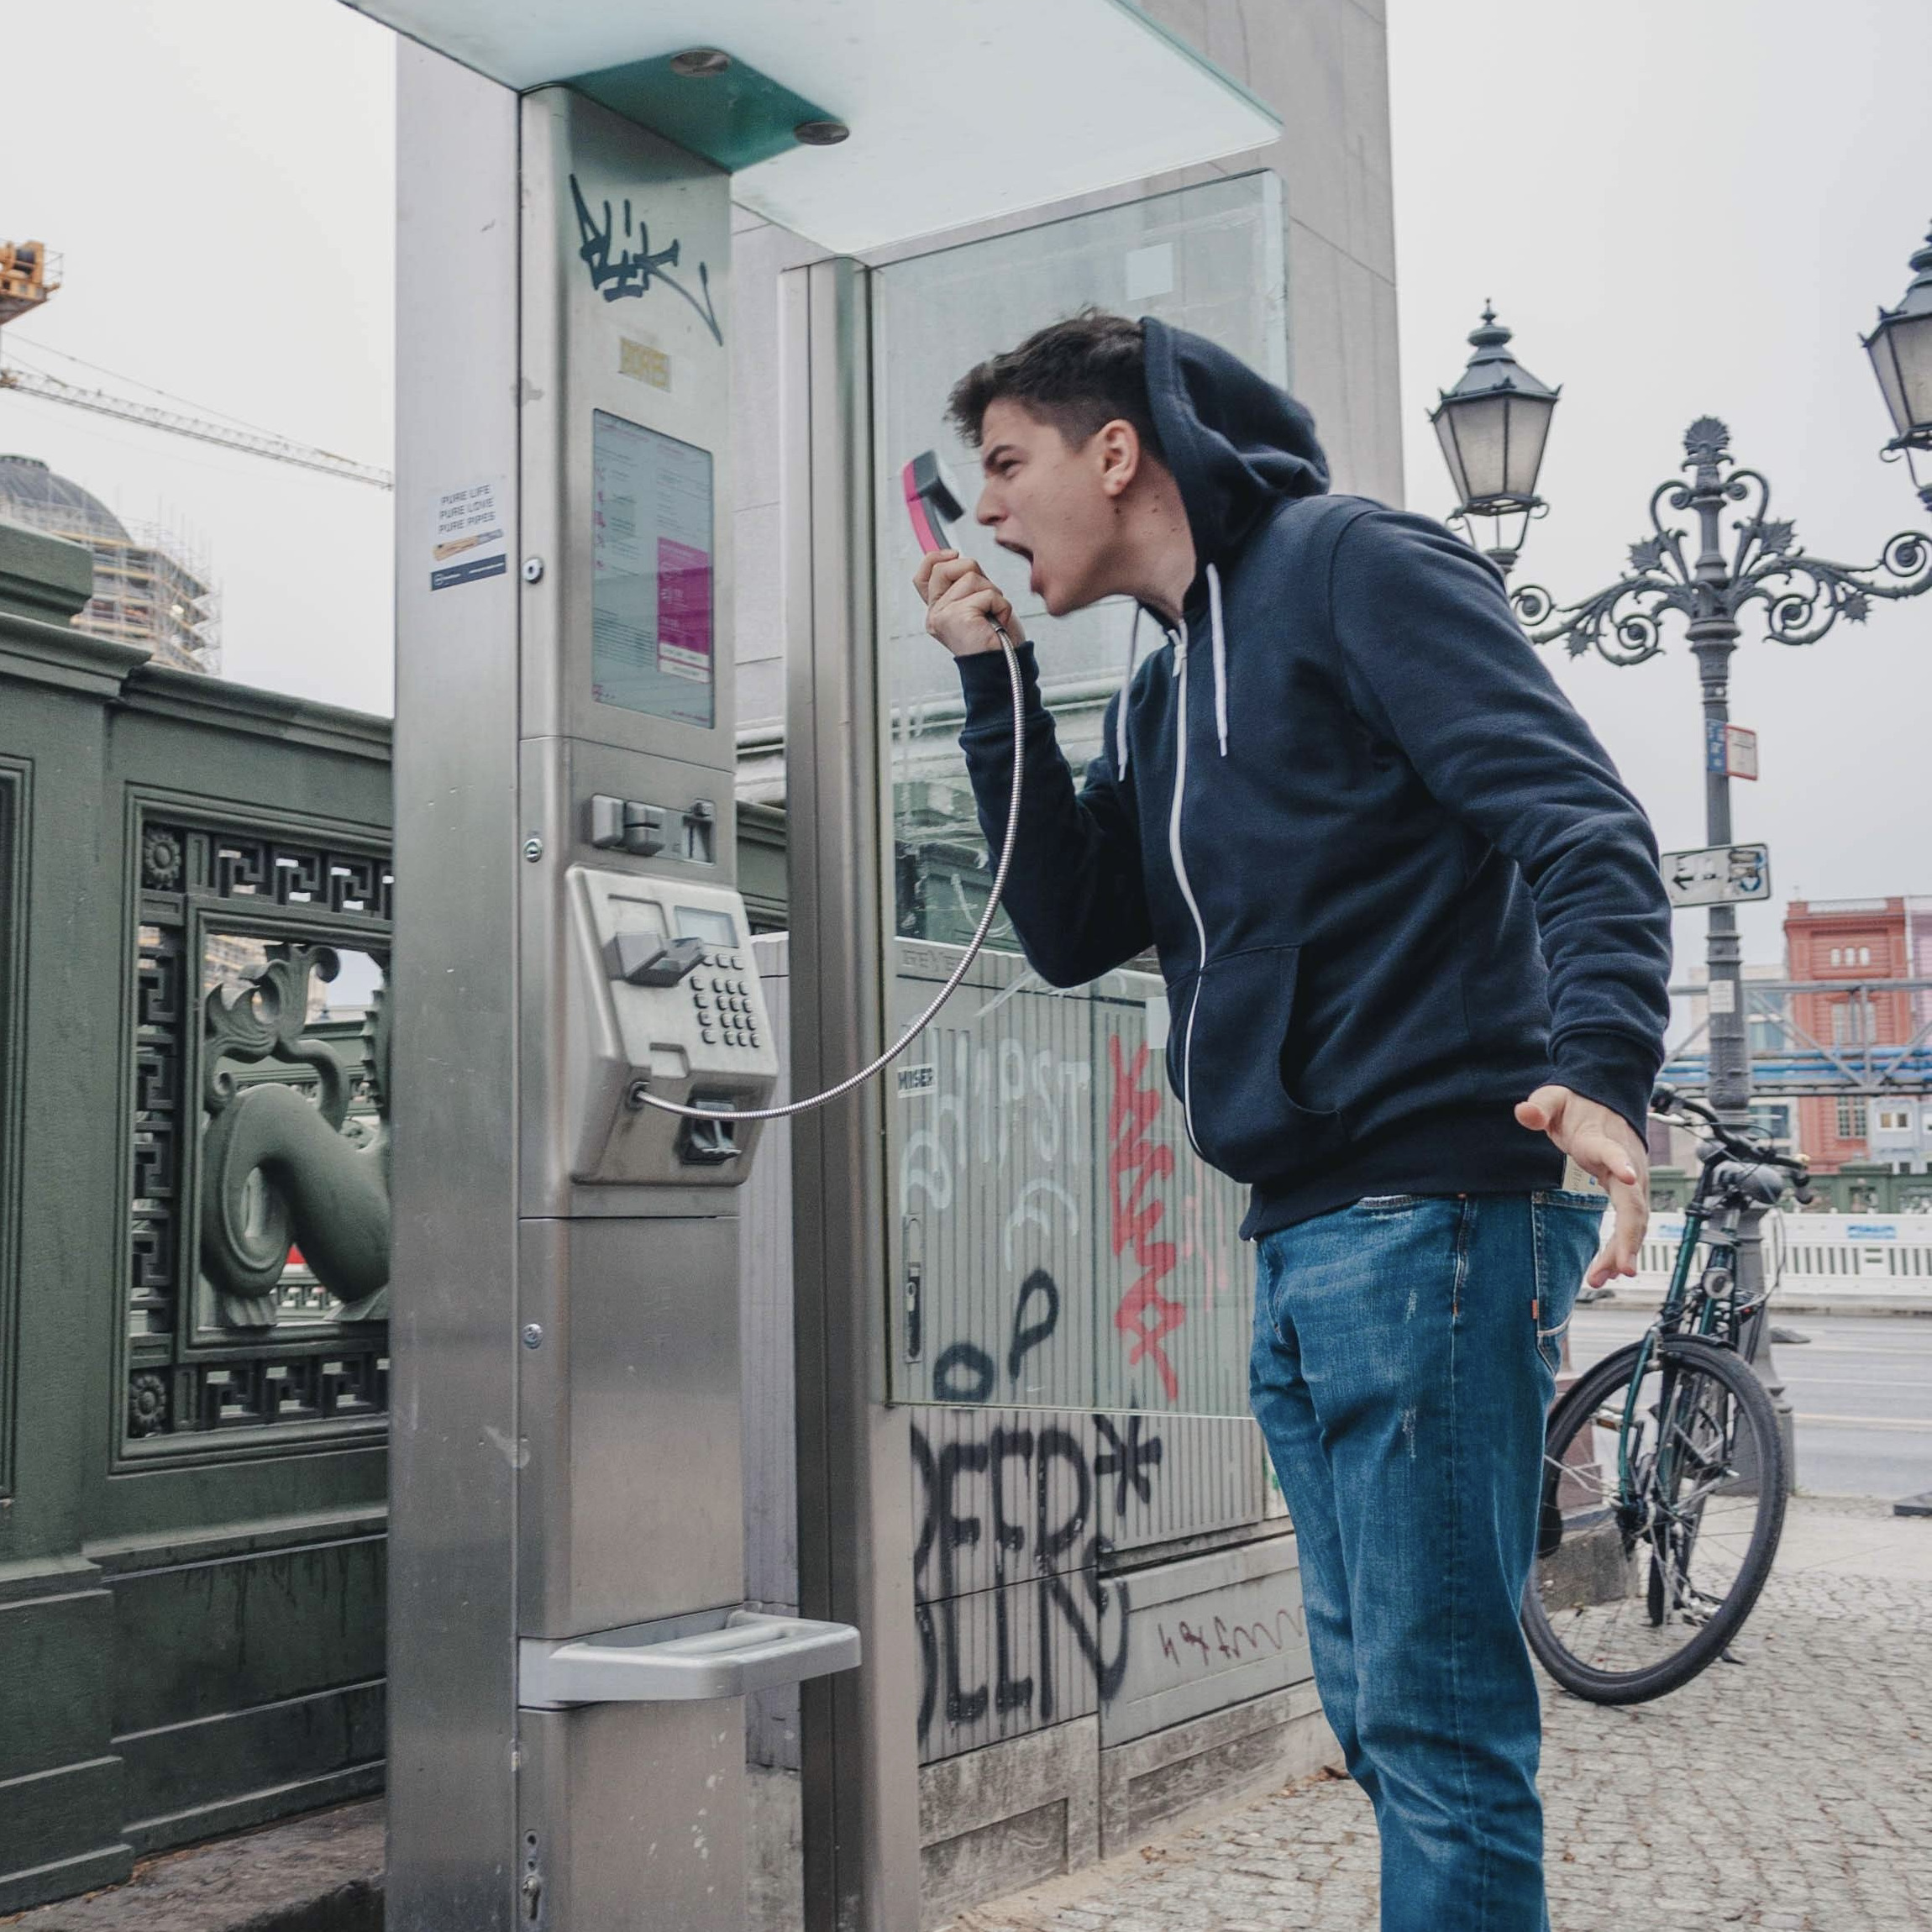 man yelling in a pay phone